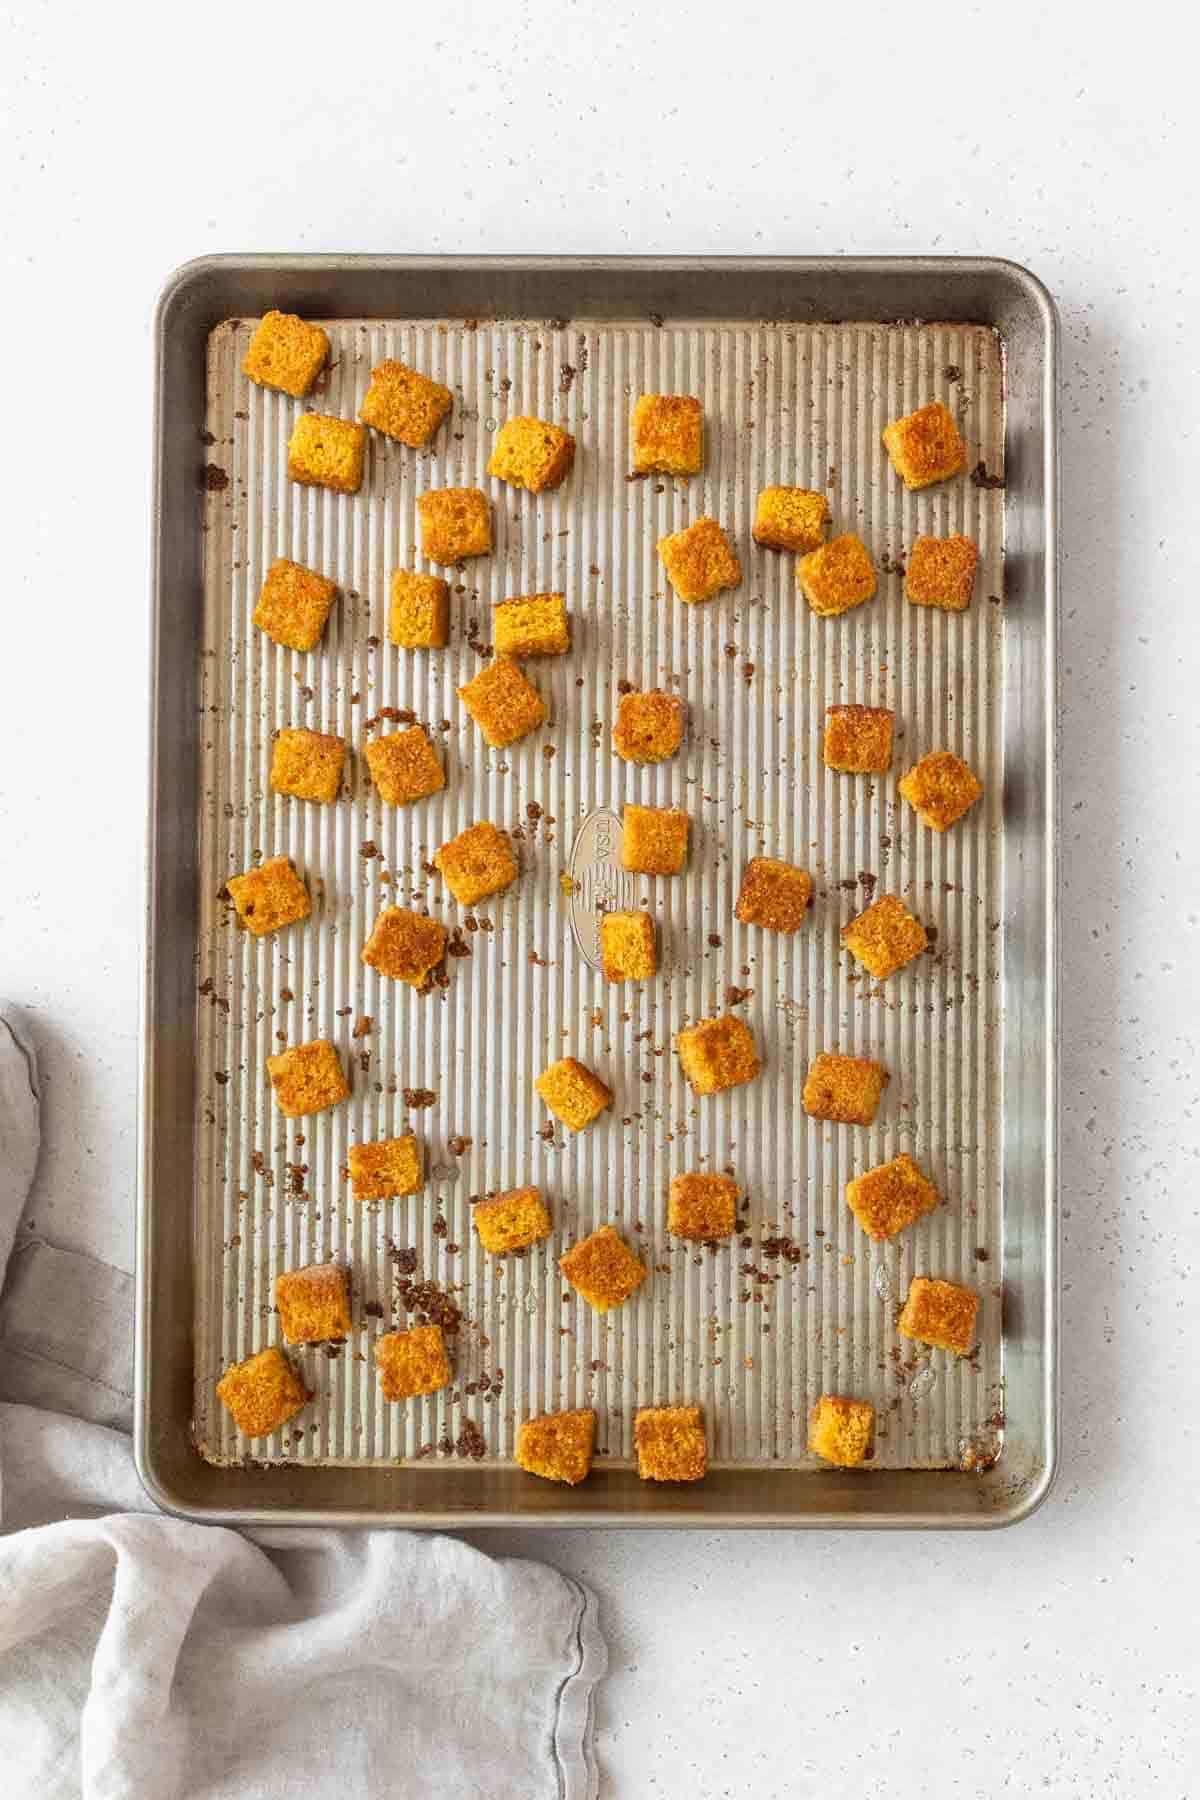 Toasted cornbread croutons on a baking sheet.